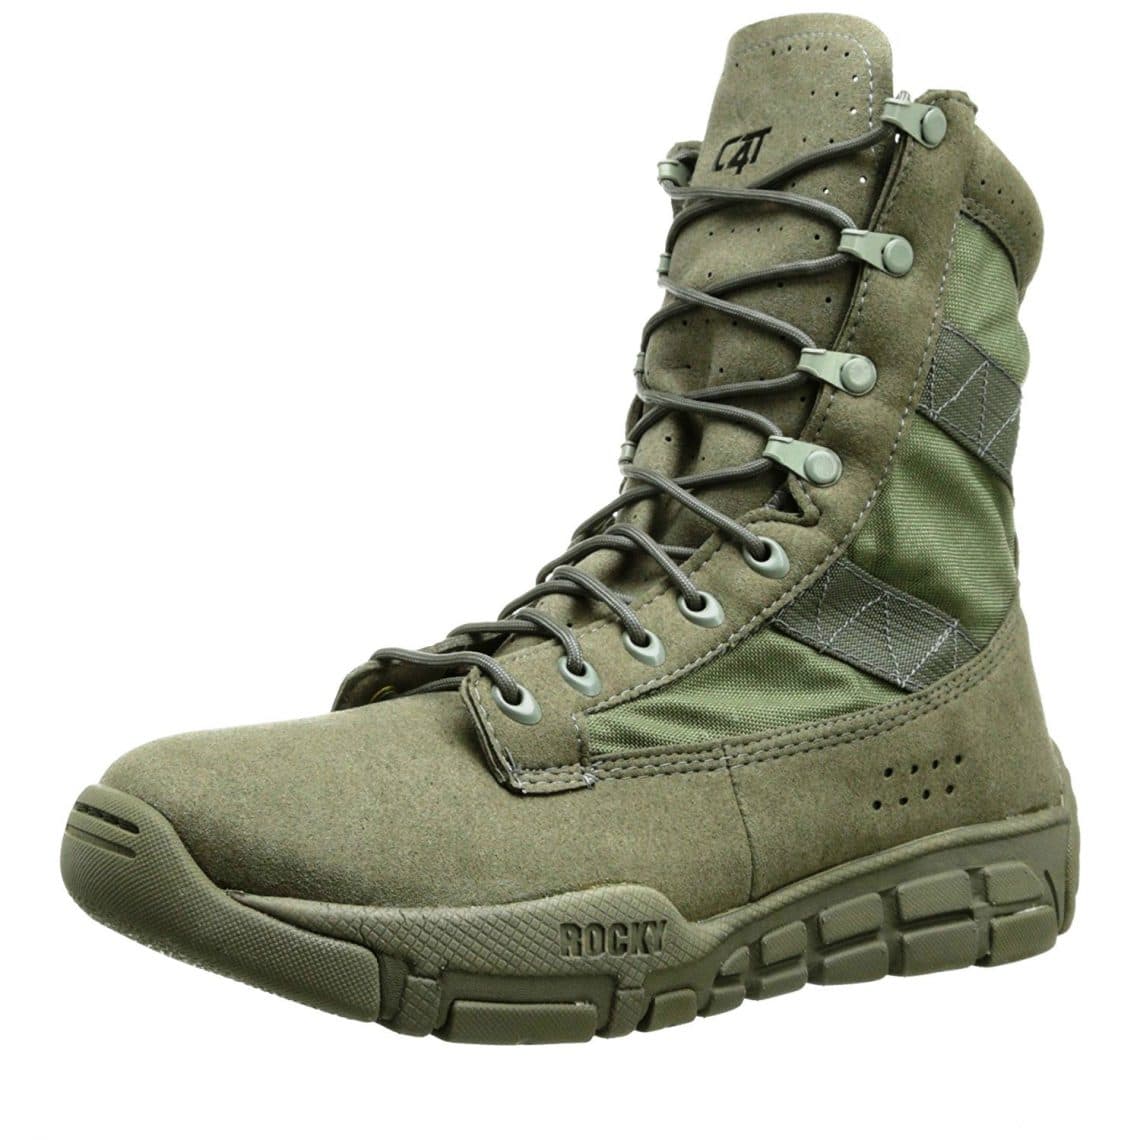 Best Jungle Boots Top Products and Buying Guide